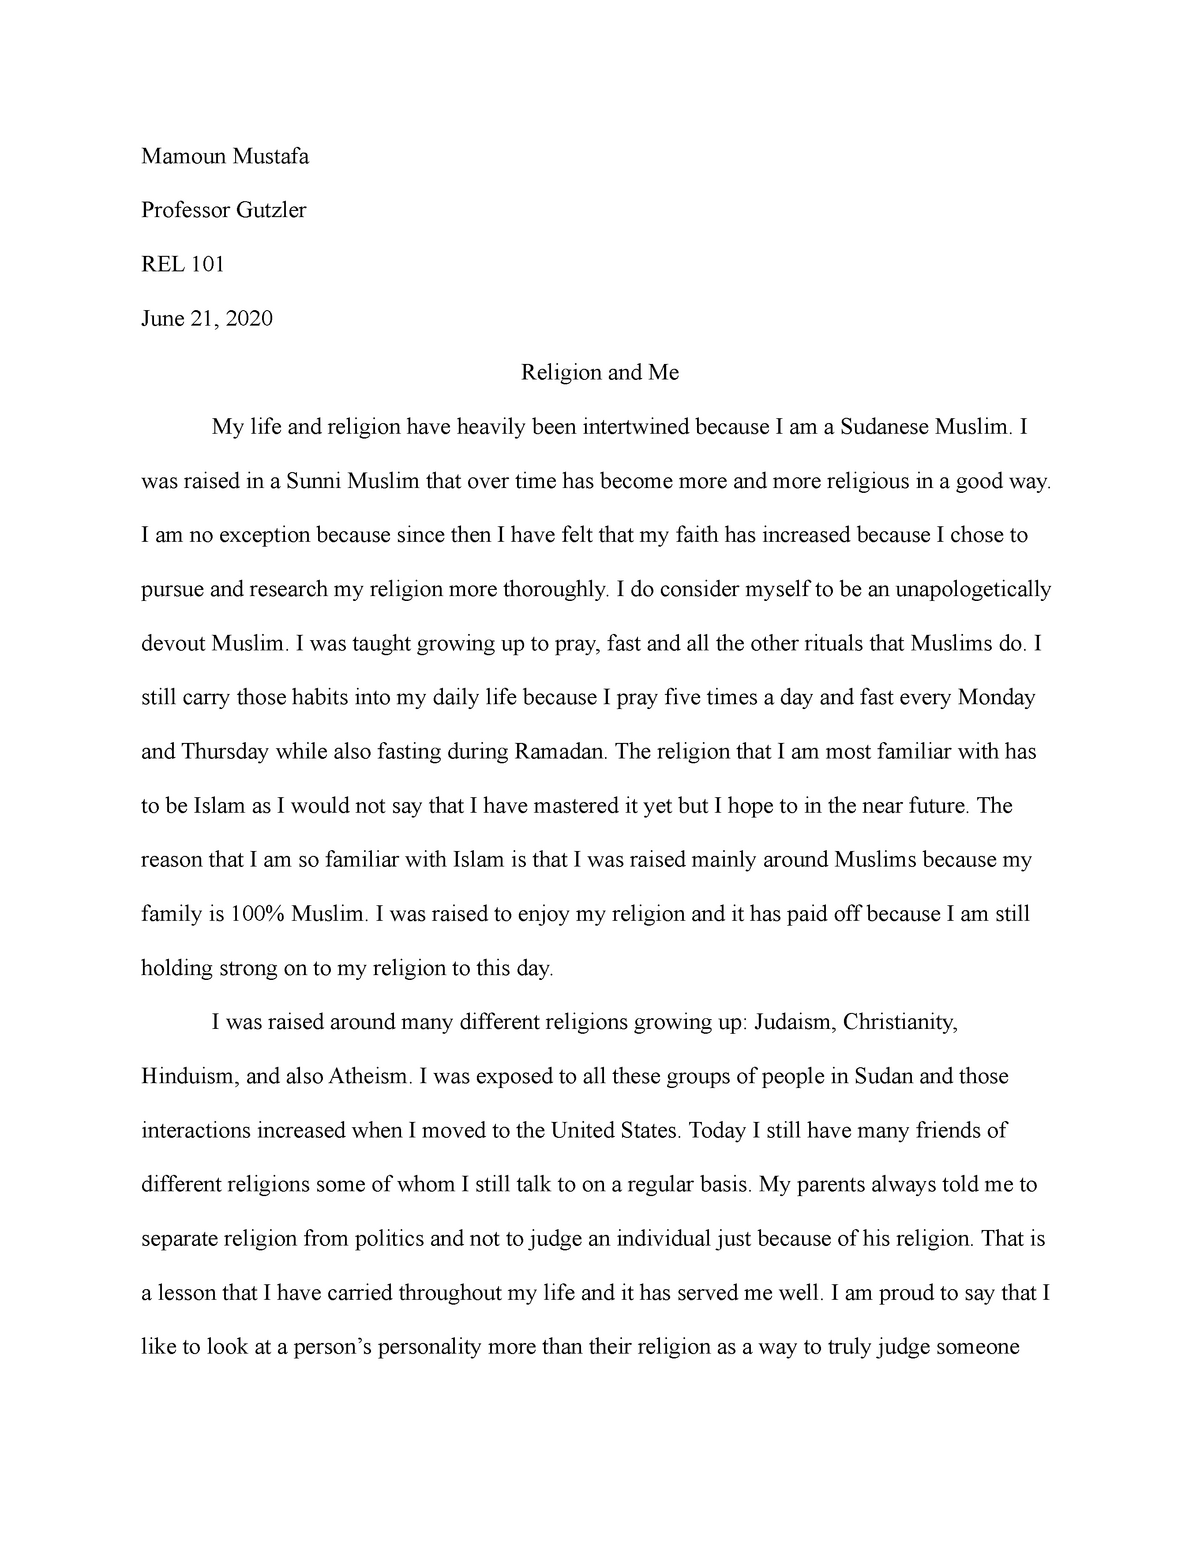 essay about religion introduction